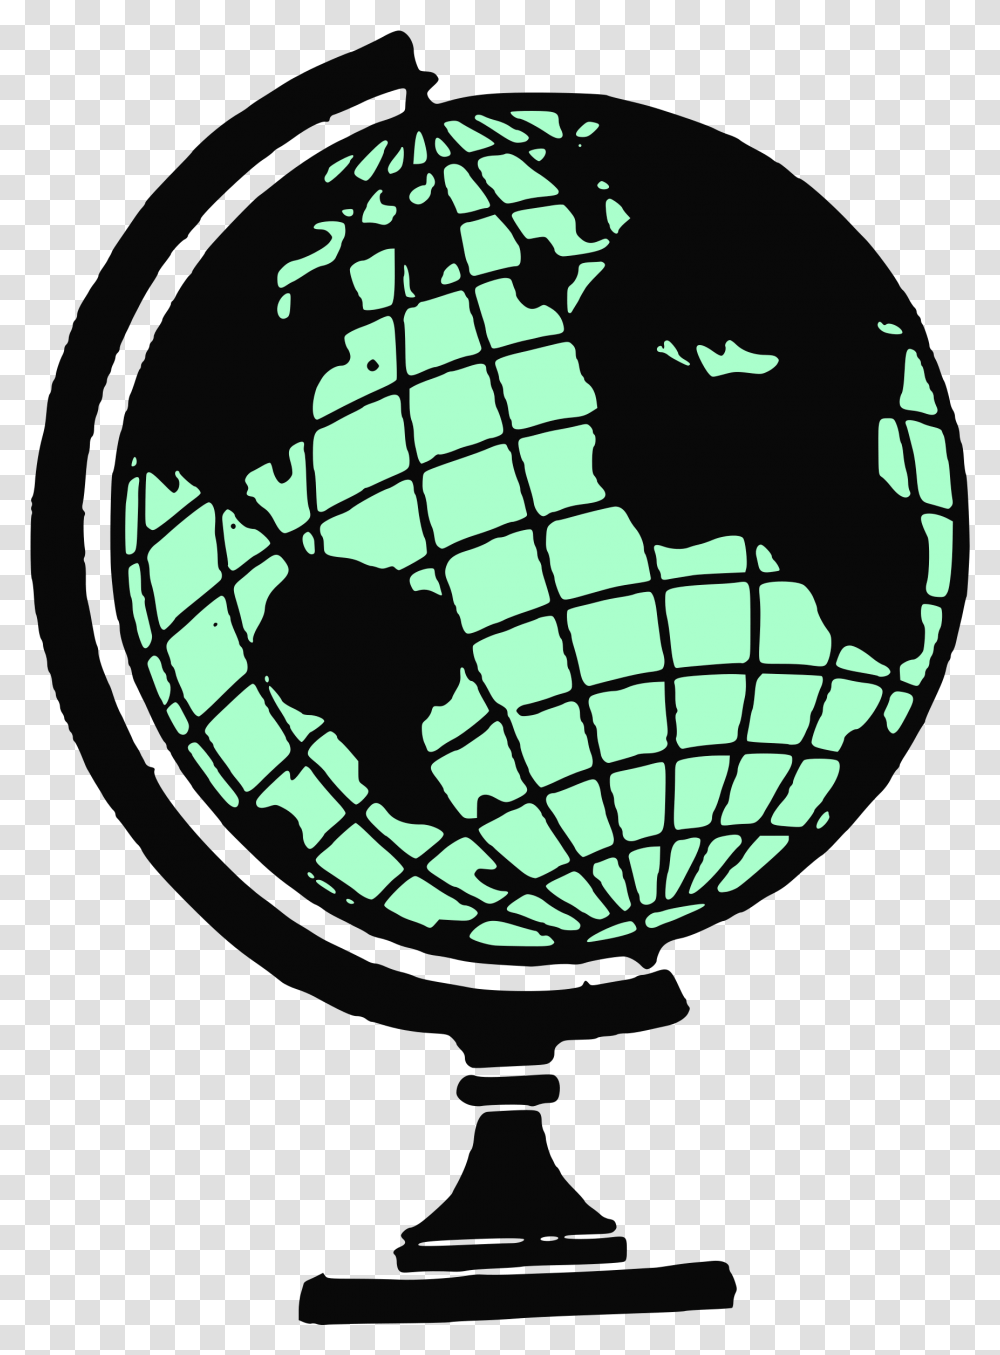 Globe Line Art Clip Globe Clipart Download 1743 Globe On Stand Vector, Outer Space, Astronomy, Universe, Planet Transparent Png